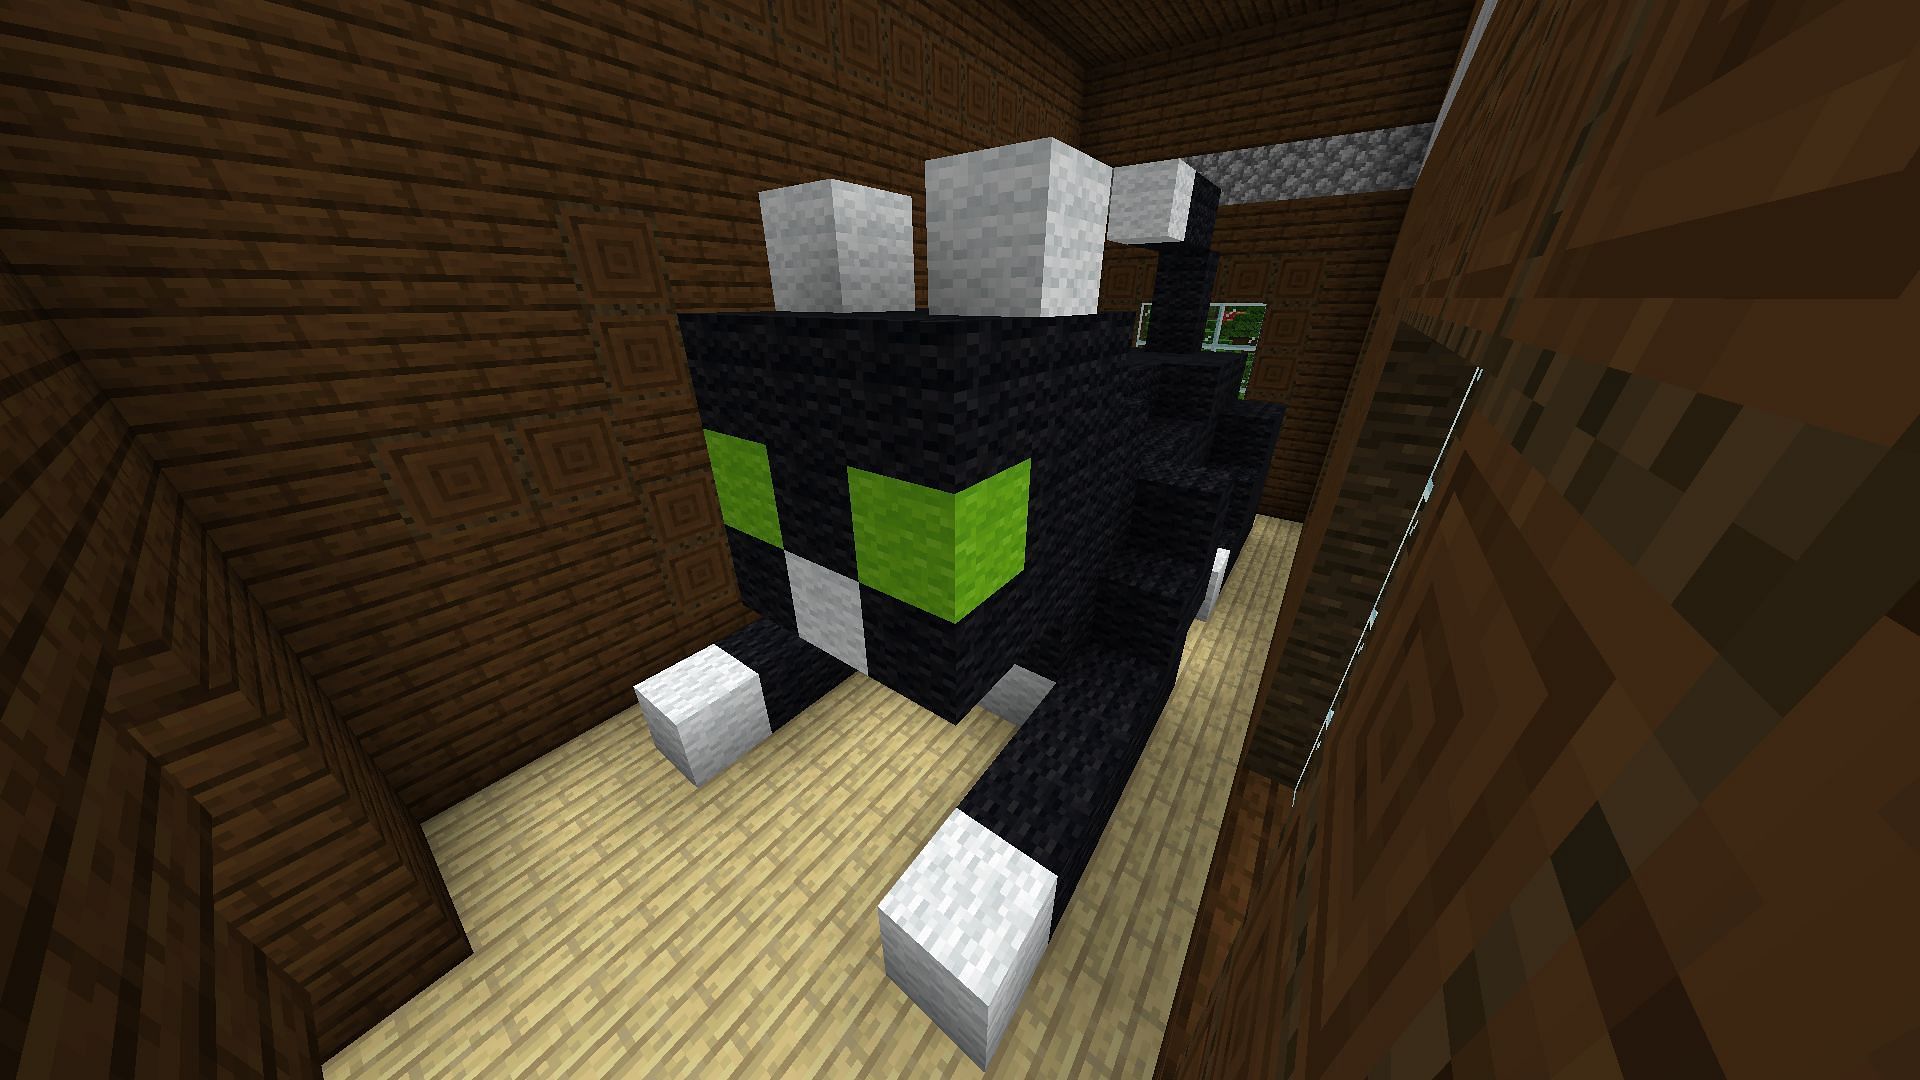 Cat statue inside the Minecraft structure (Image via Mojang)